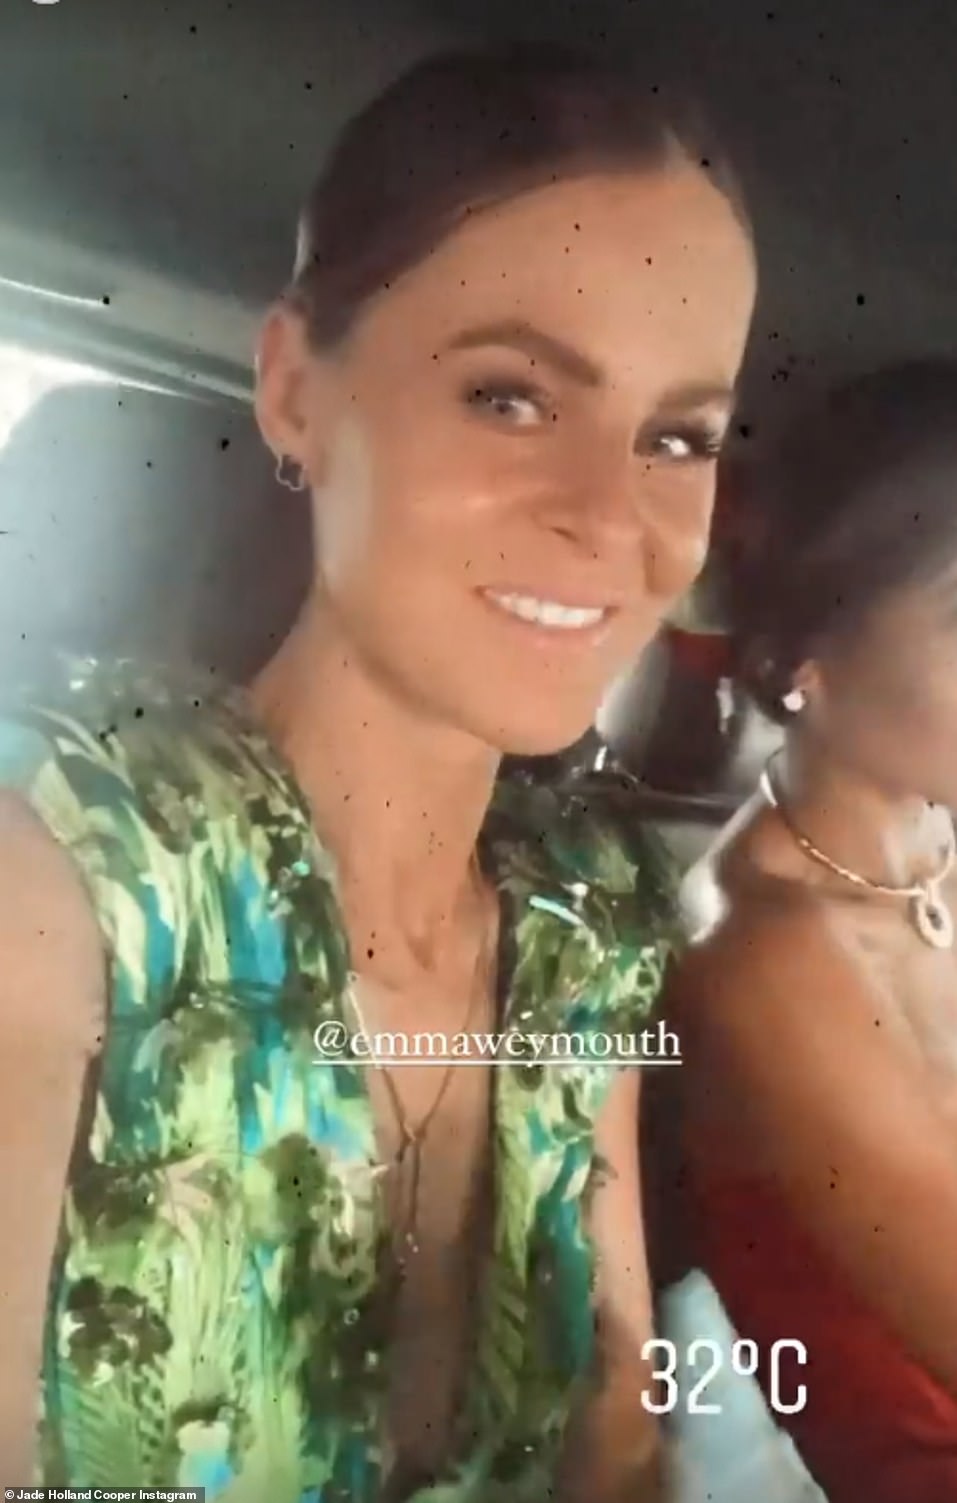 Jade Holland Cooper posed for pictures with Emma Weymouth in the back of a car, seemingly on their way to the venue